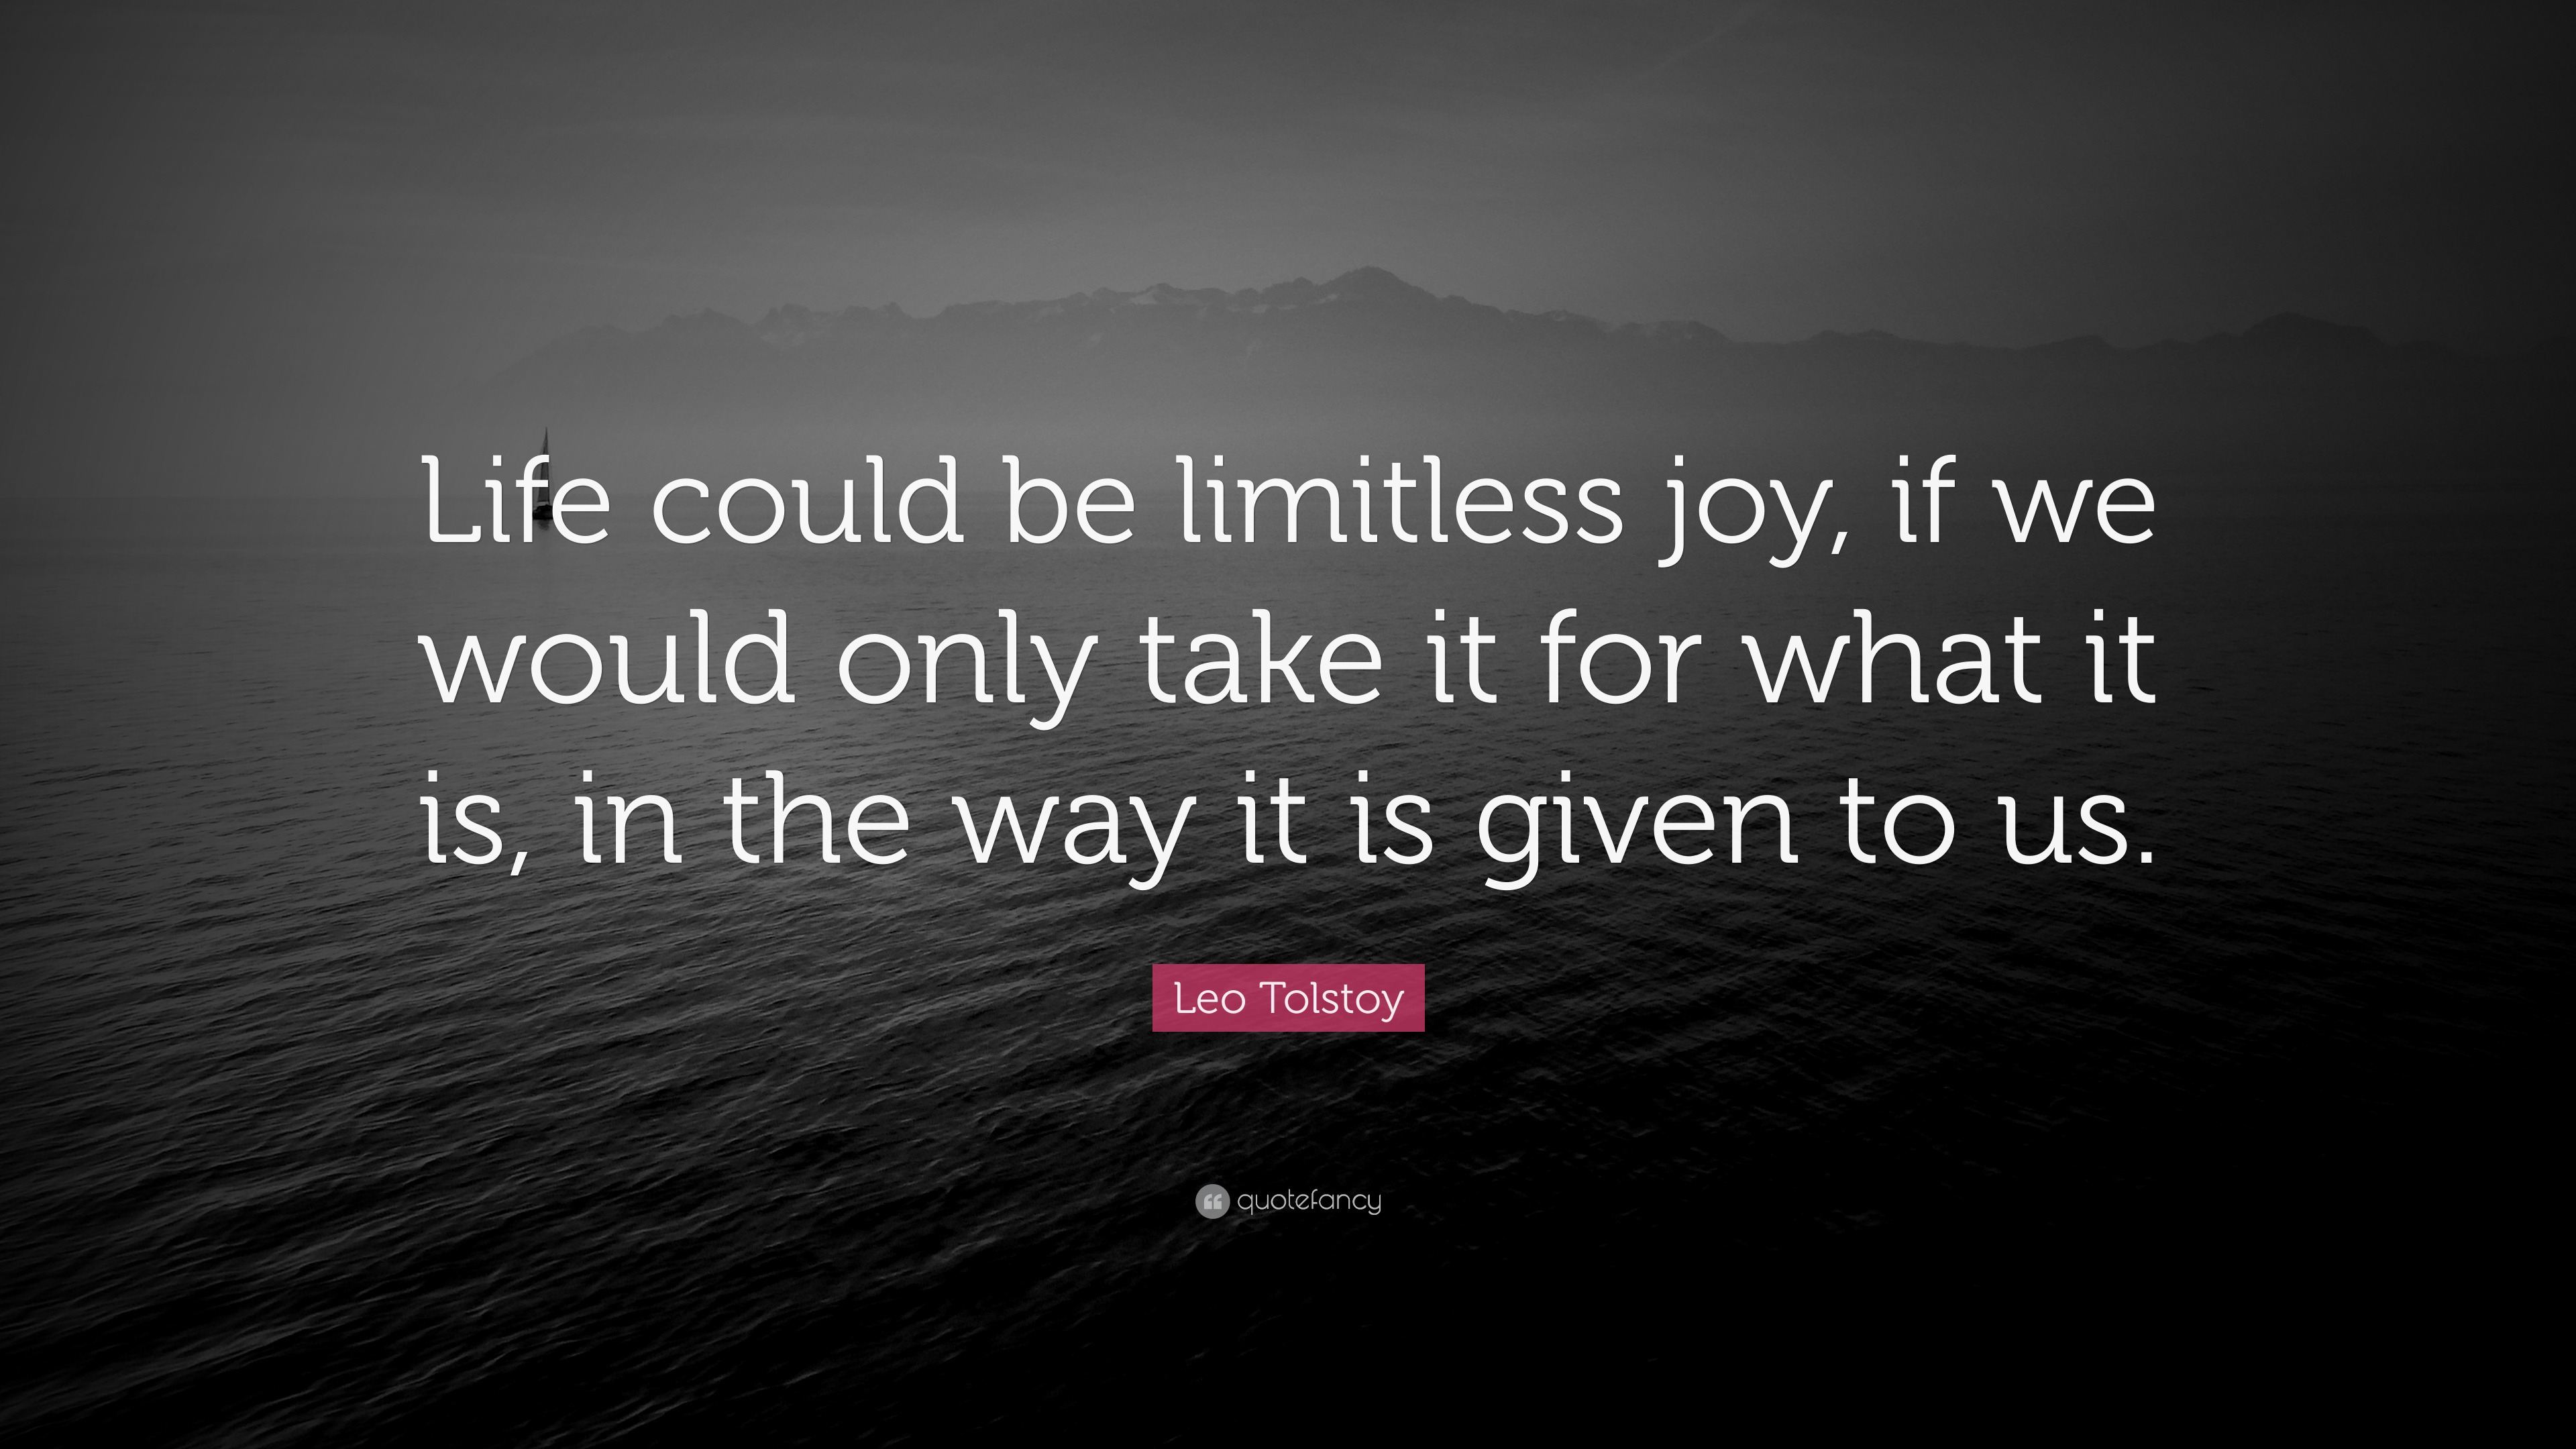 Leo Tolstoy Quote: “Life could be limitless joy, if we would only take ...